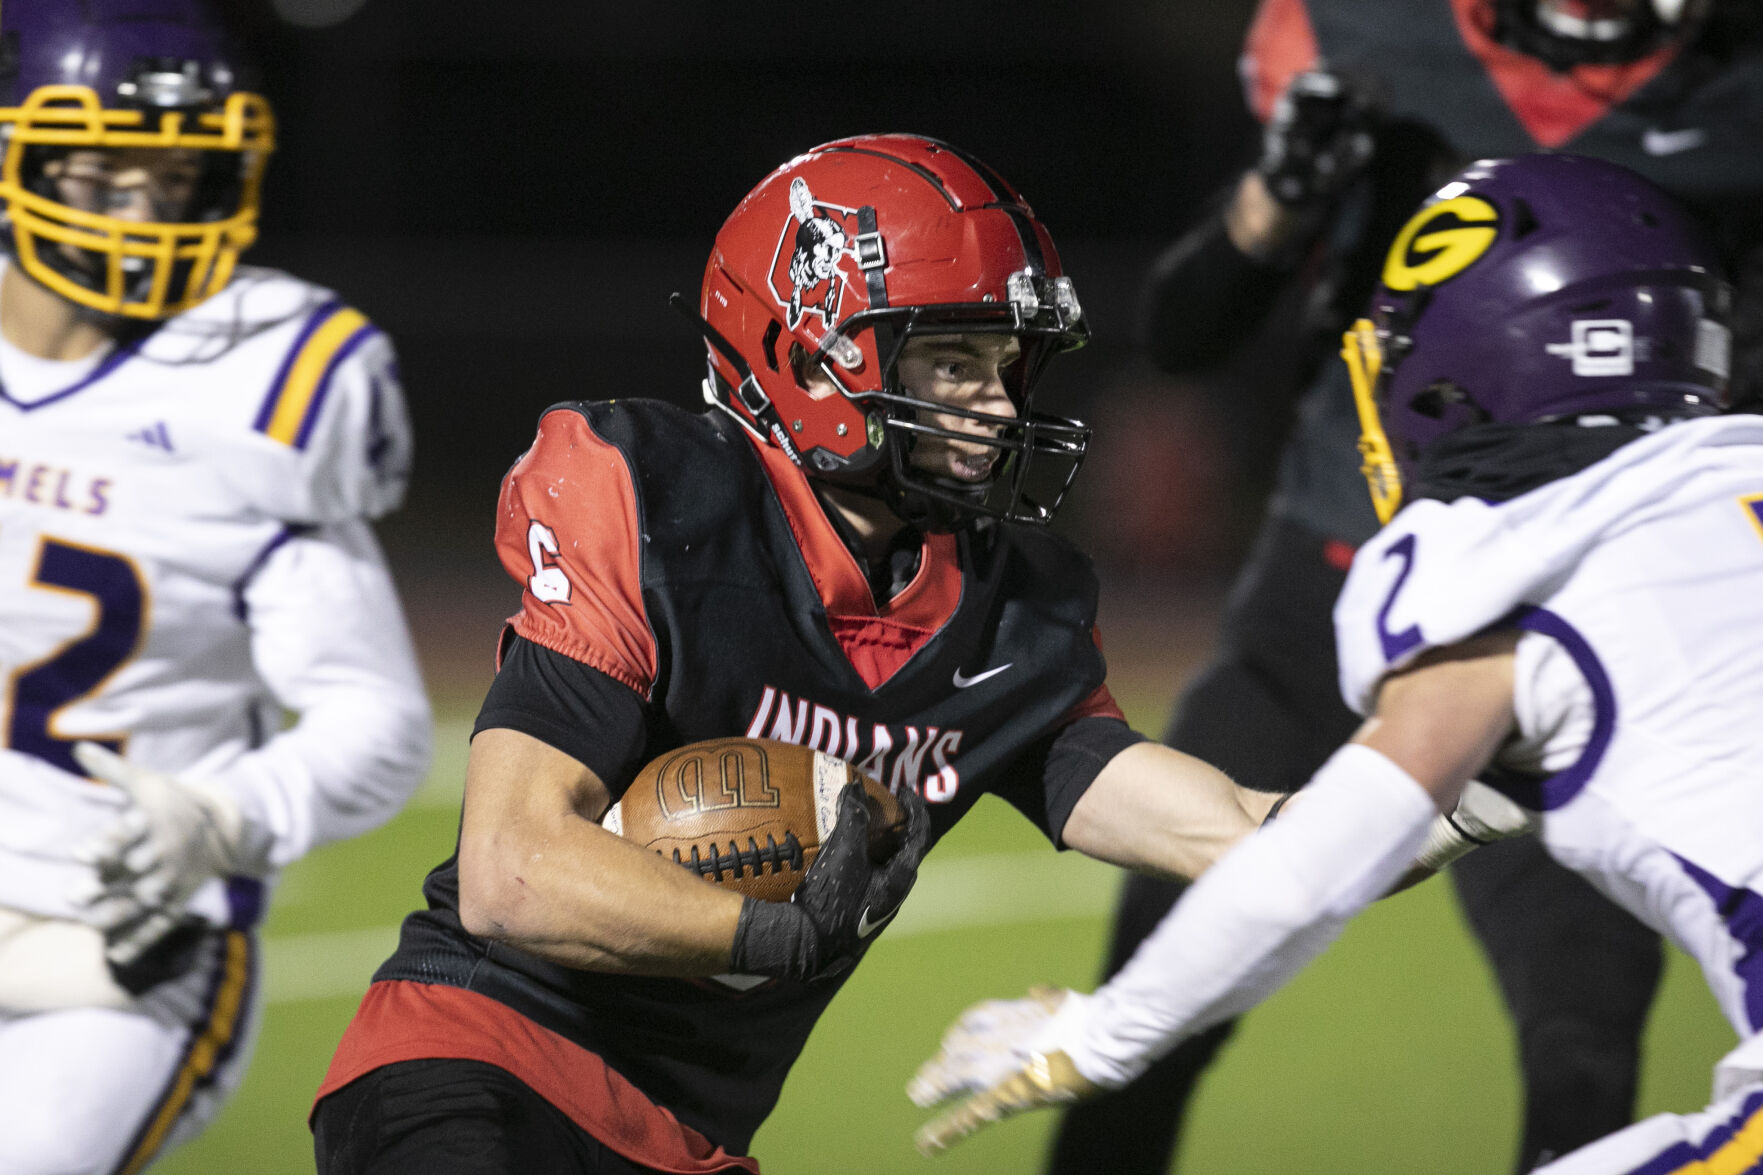 Miles Porwoll’s Successful Transition from Quarterback to Wide Receiver for Cheyenne Central